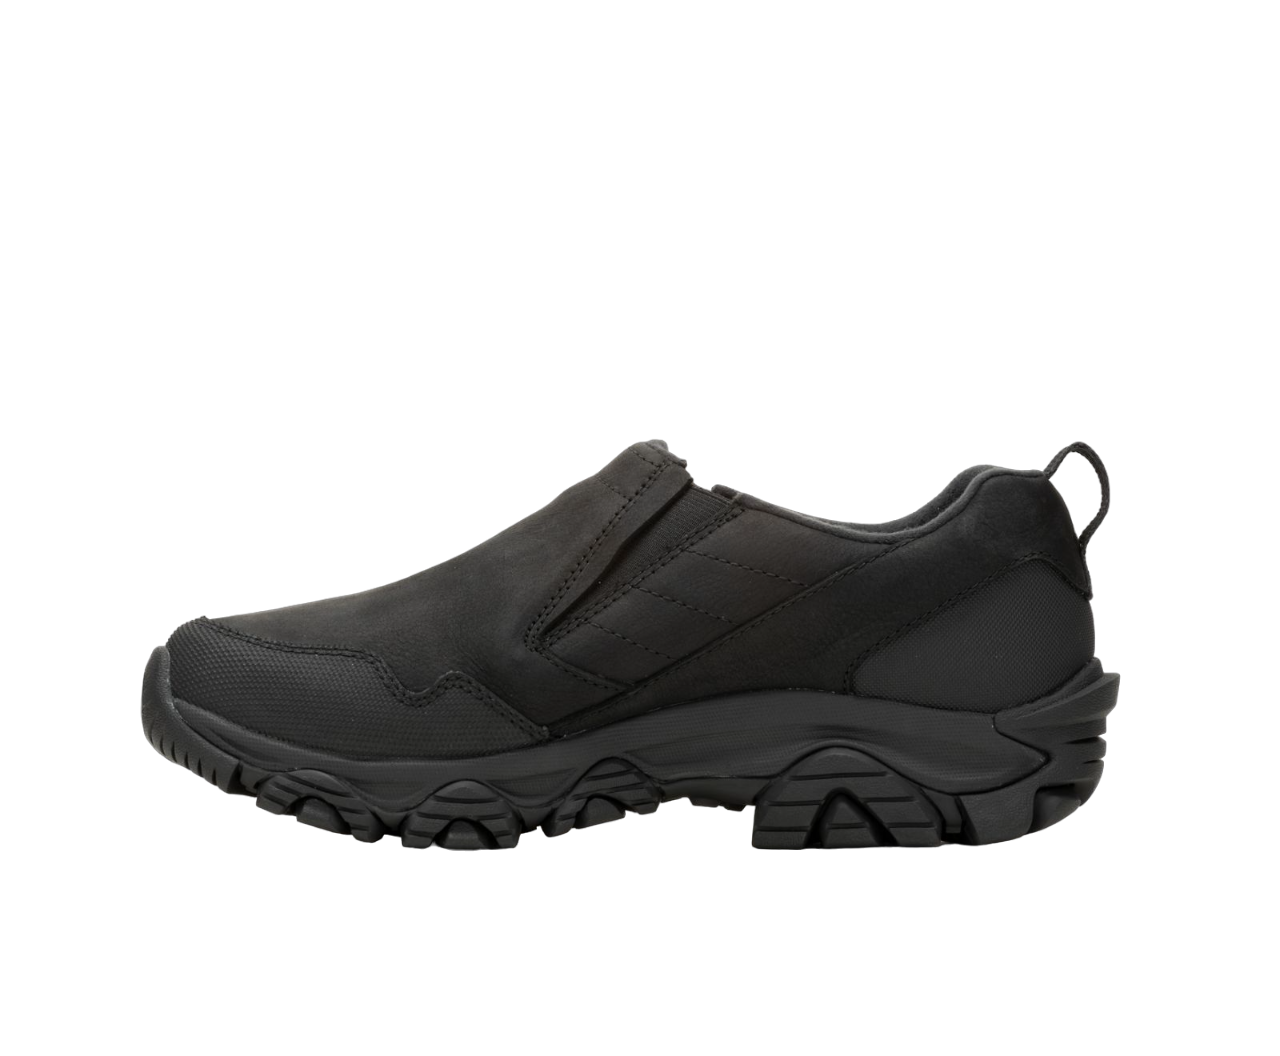 Women's ColdPack 3 Thermo Moc WP Black